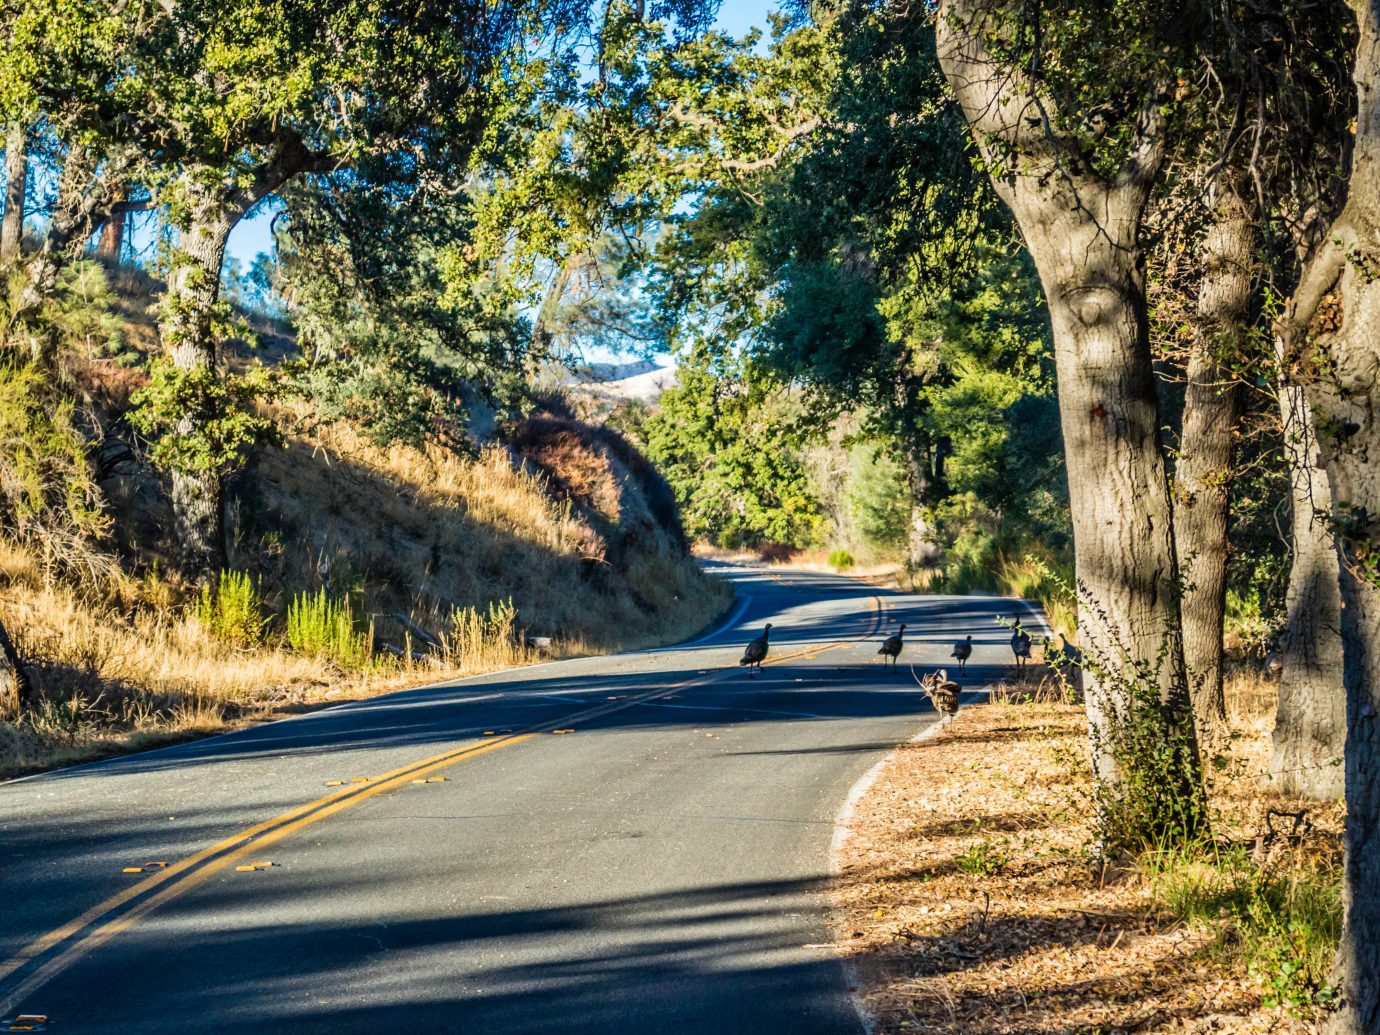 Family of four wild turkeys are roaming around the road of Pinnacles National Park, California